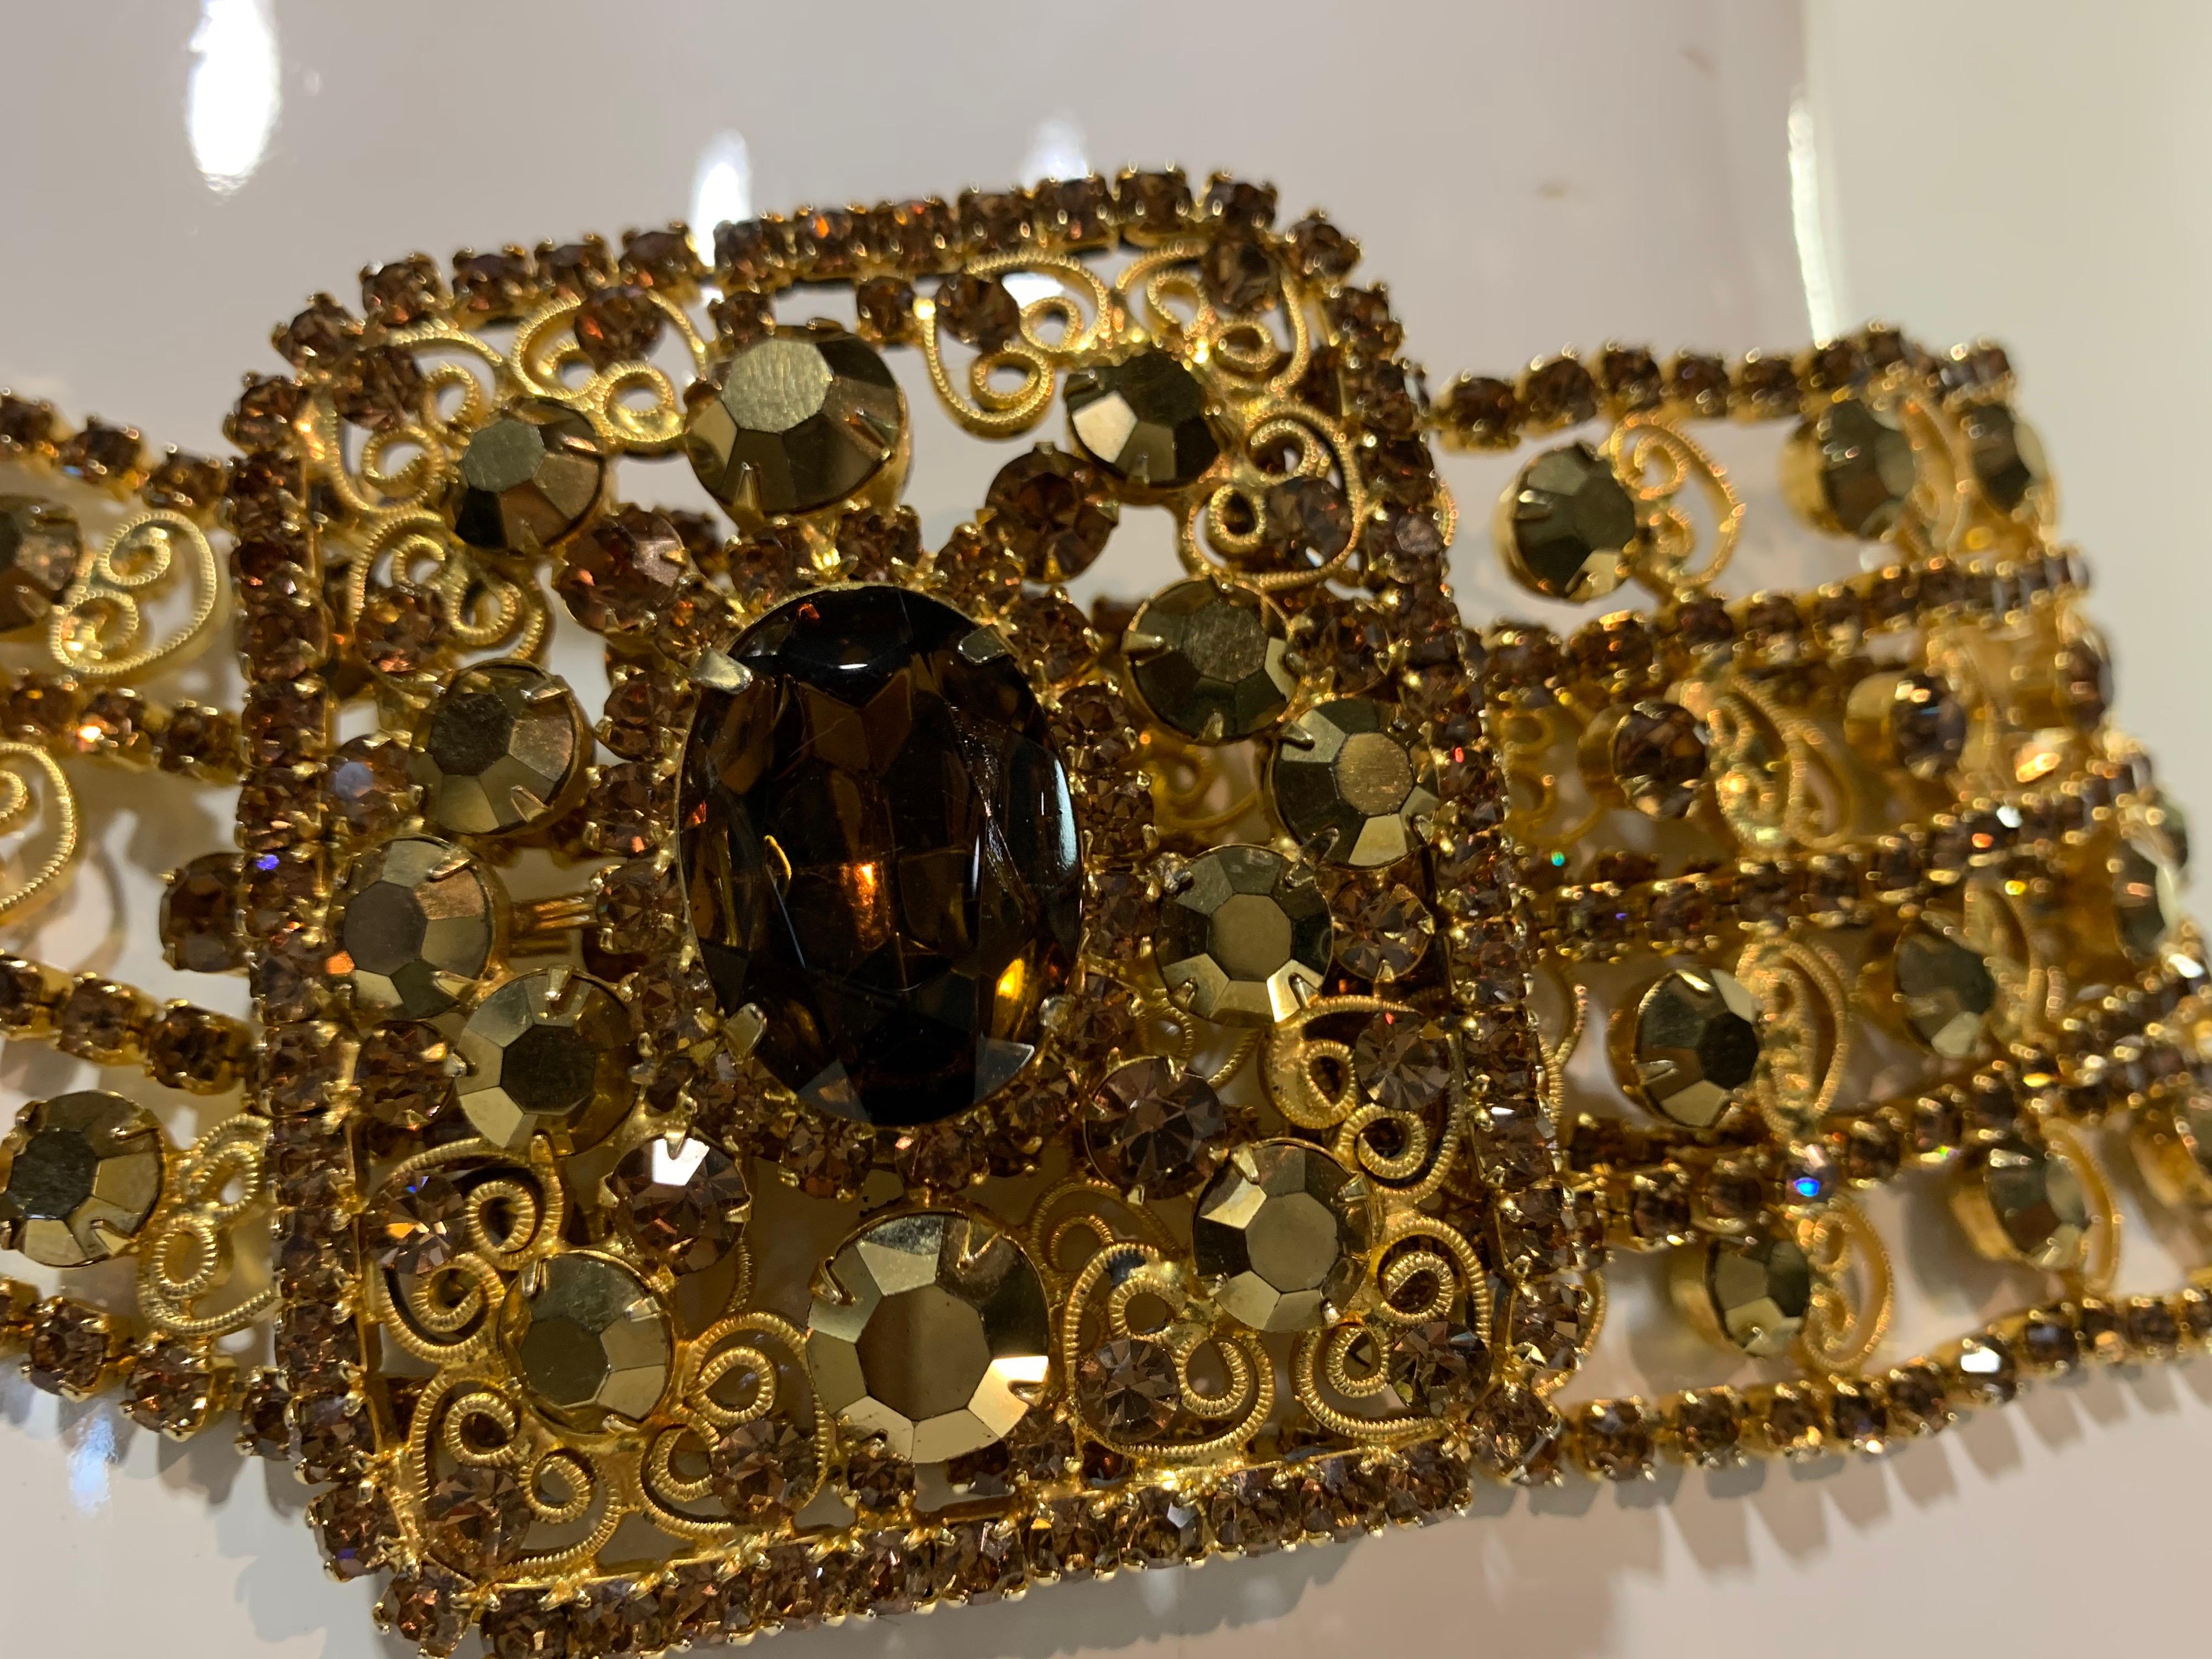 A fabulous and glamorous 1970s wide Kenneth Jay Lane topaz rhinestone and gold filigree evening belt with square buckle and huge rhinestone centerpiece. Adjustable to 30